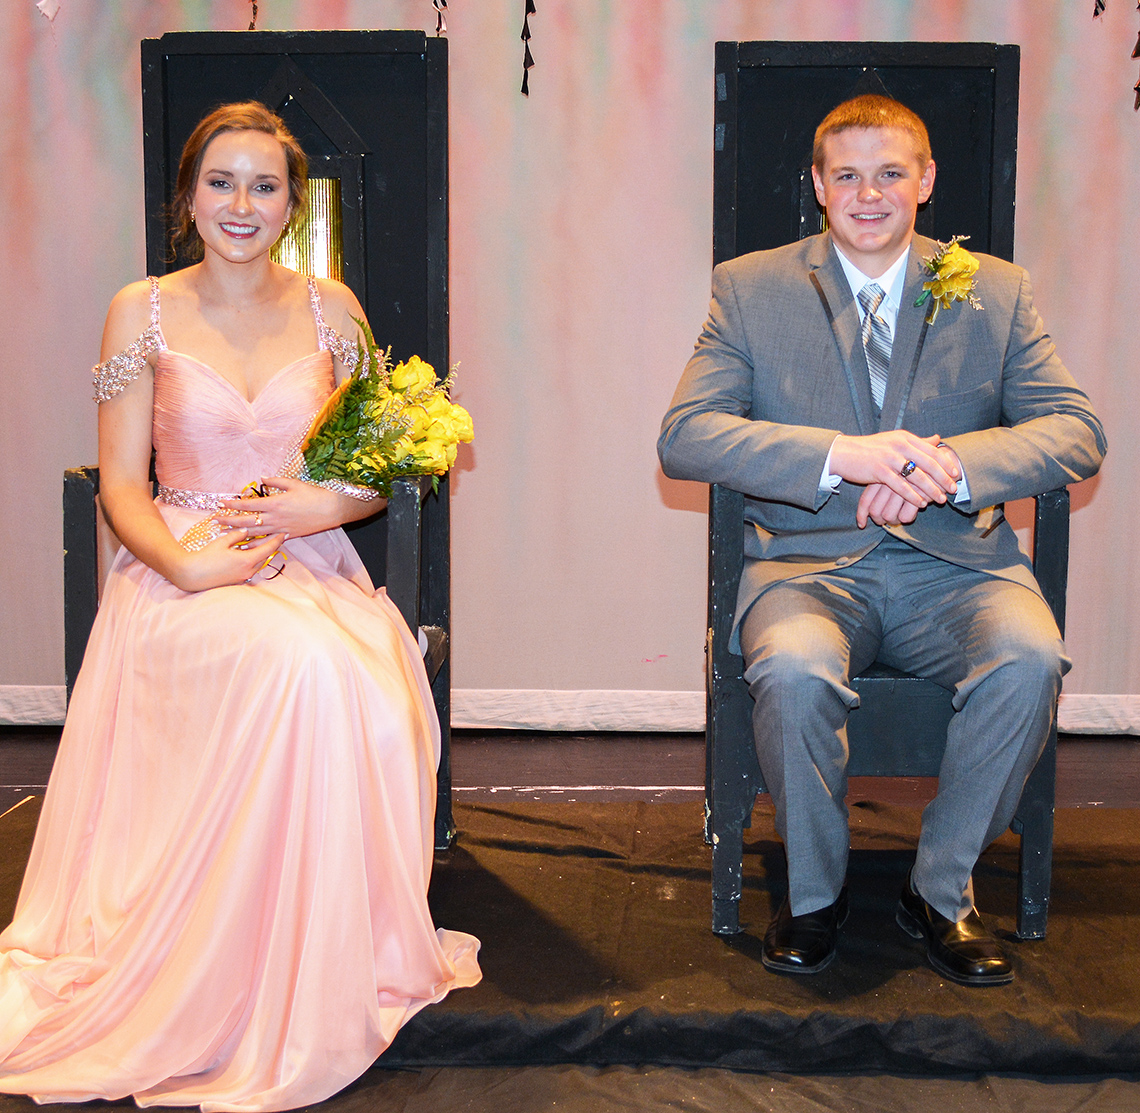 McQuirk, Lavers named Mr. and Miss SHS | The Snyder News